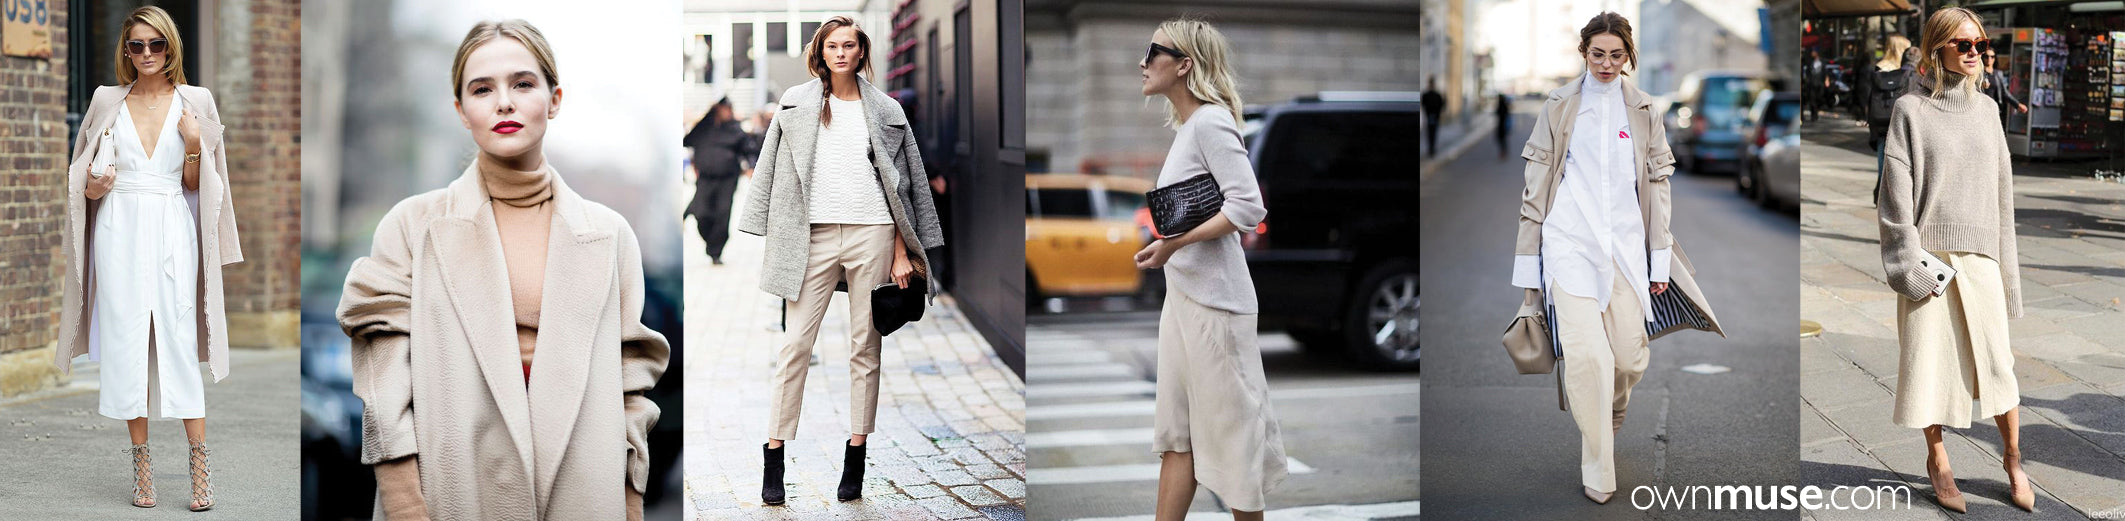 Street style fashion and style in base colour beige featured on ownmuse.com